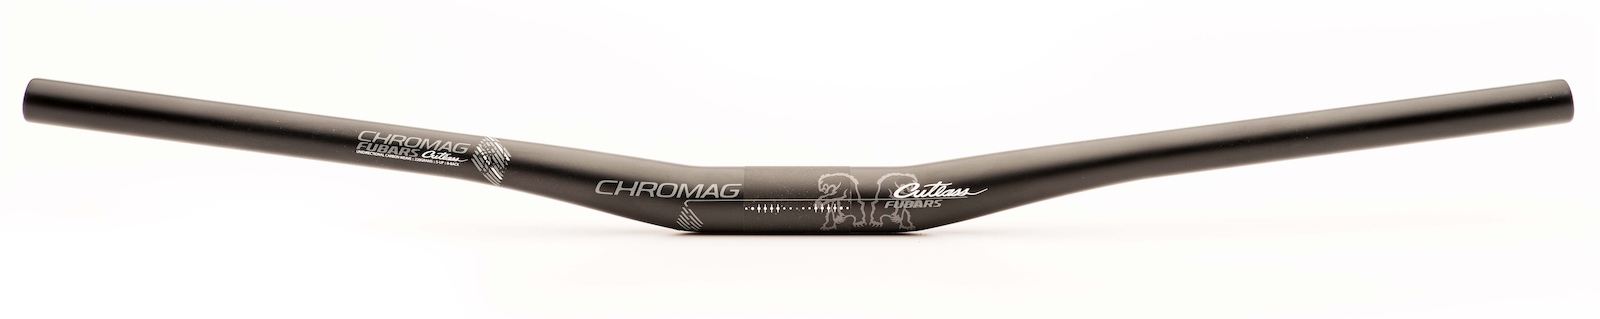 At 730mm, the Fubars Cutlass is one of the widest All Mountain / Enduro class carbon handlebars on the market. 210g of premium quality unidirectional carbon fiber ensures that this bar is about reliable strength and durability with a responsive feel. It features an18mm rise for aggressive rider position tuned with a 5 degree up, 8 degree back orientation.